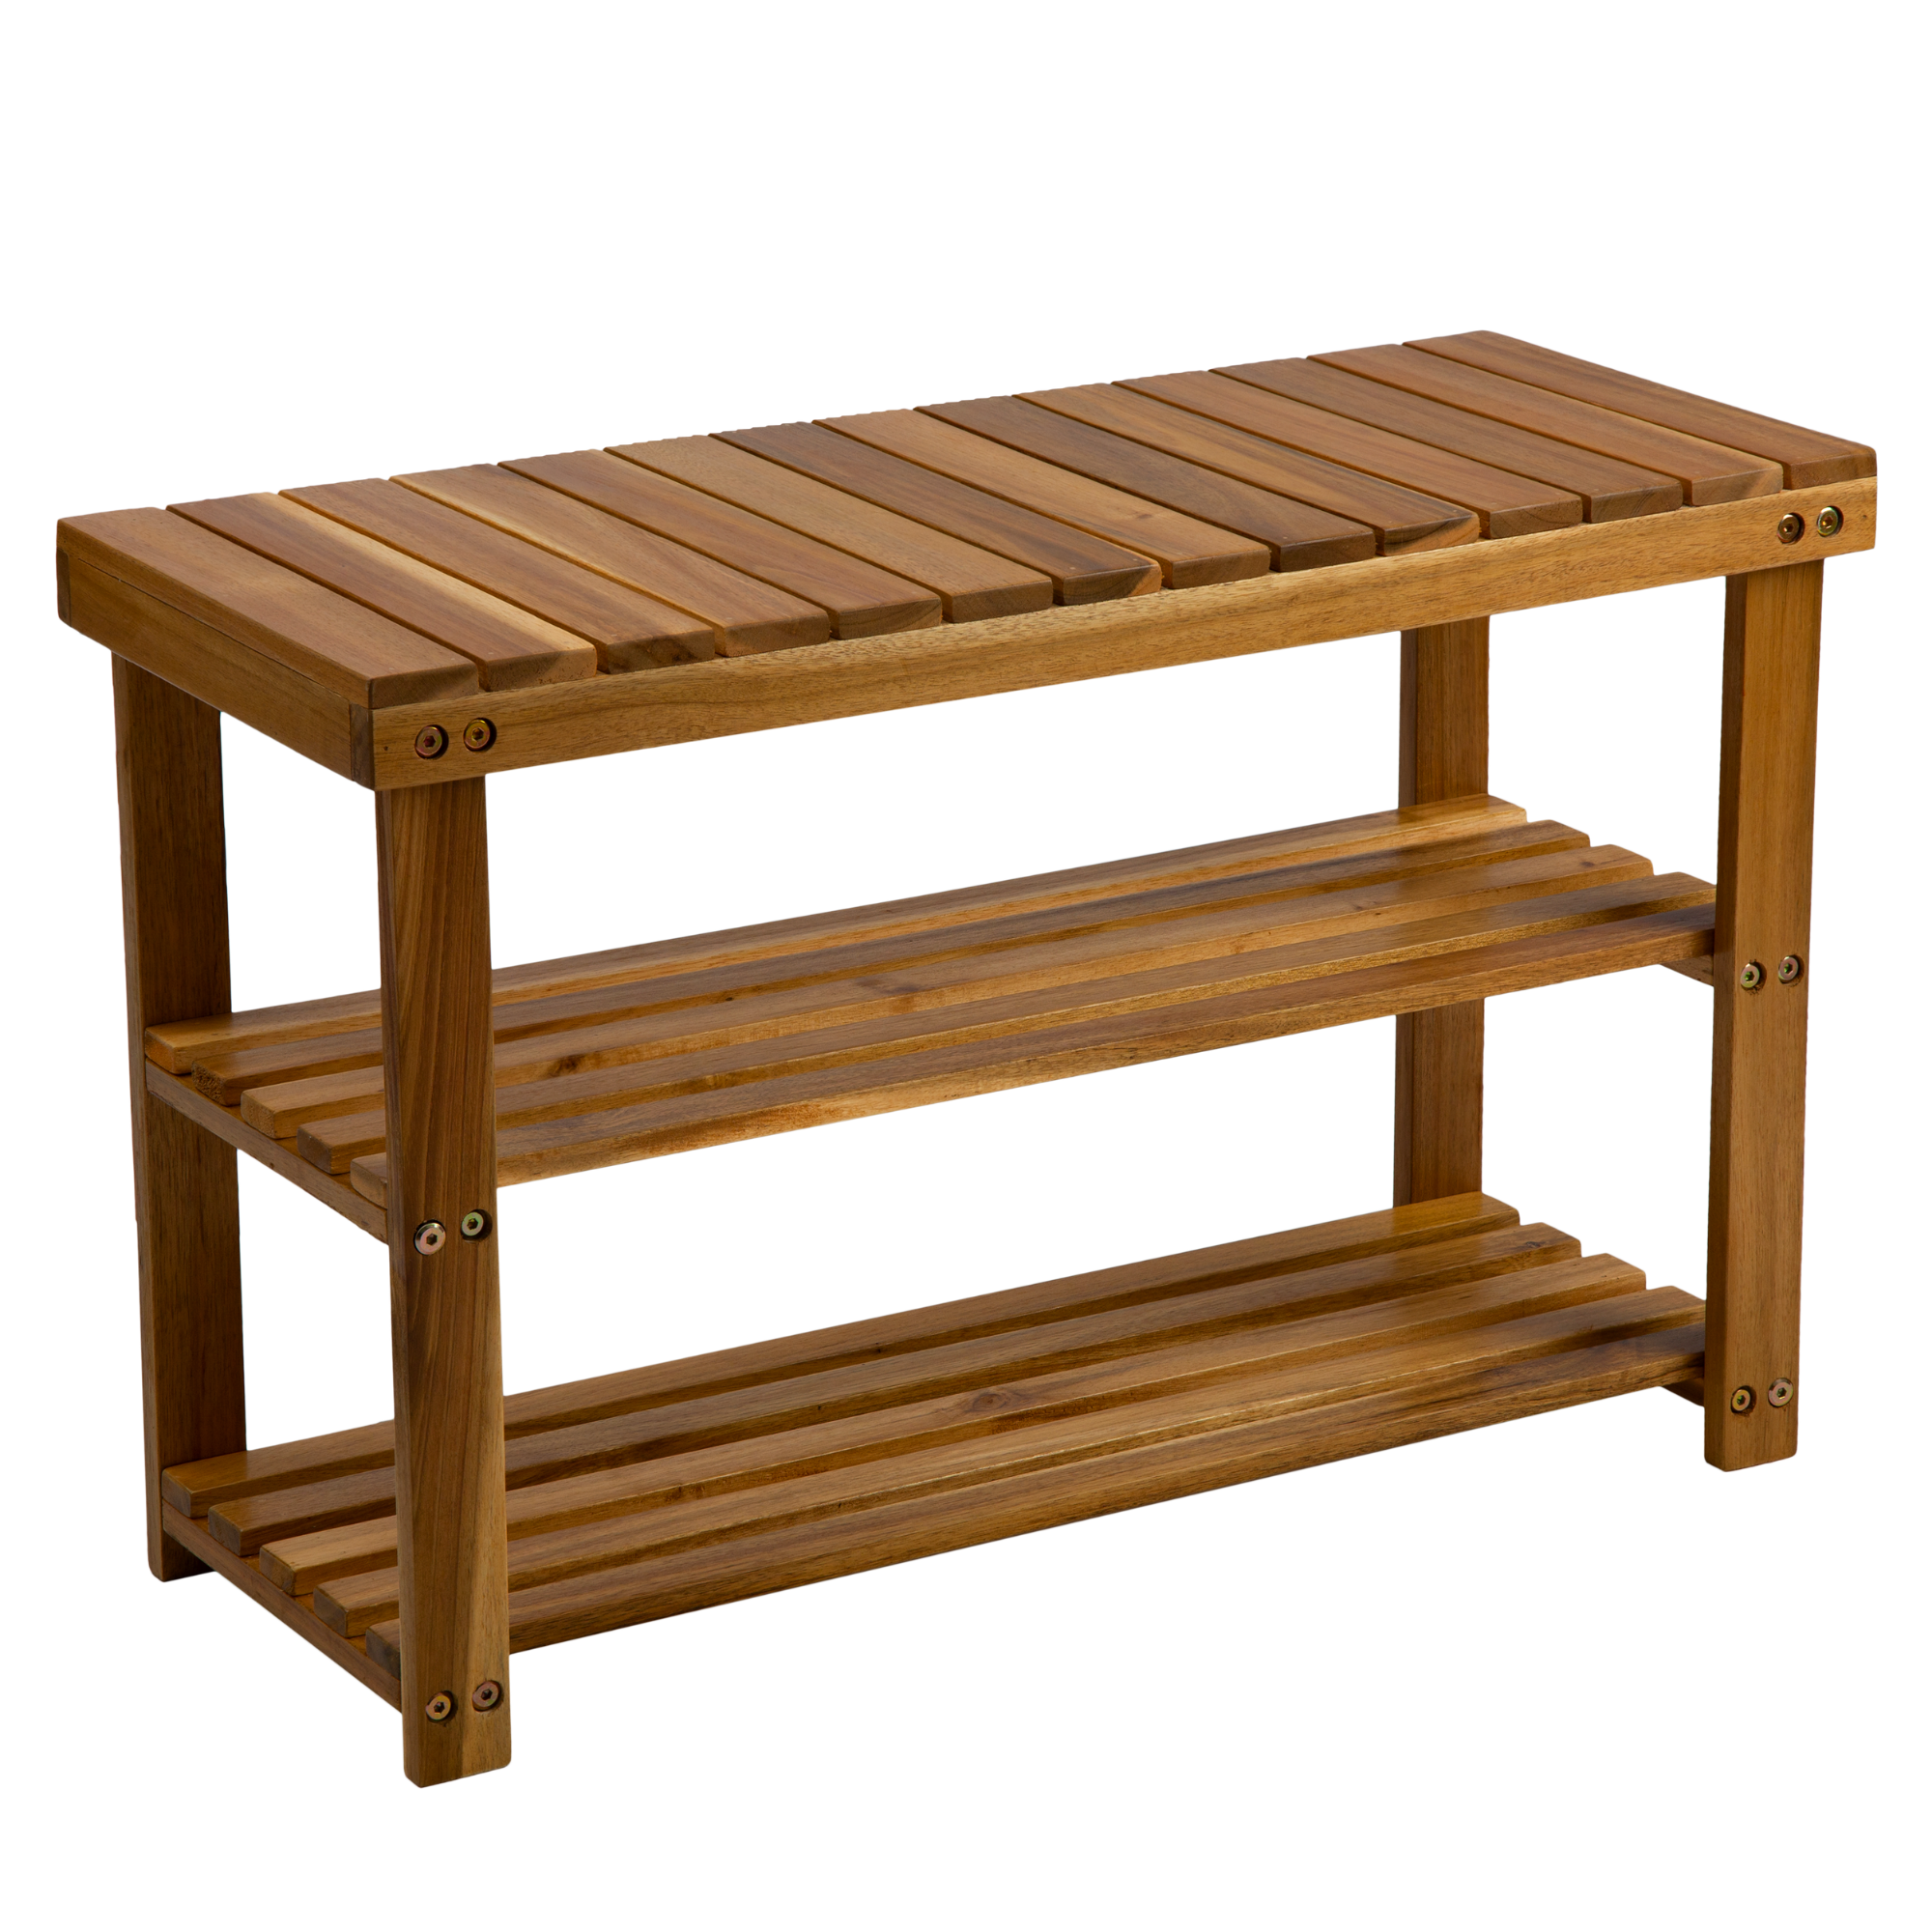 BEEFURNI Acacia Wood Shoe Rack Bench Strong Weight Bearing Upto 350 LBS Best Ideas For Entryway Frontdoor Bathroom, Natural Color.-Boyel Living